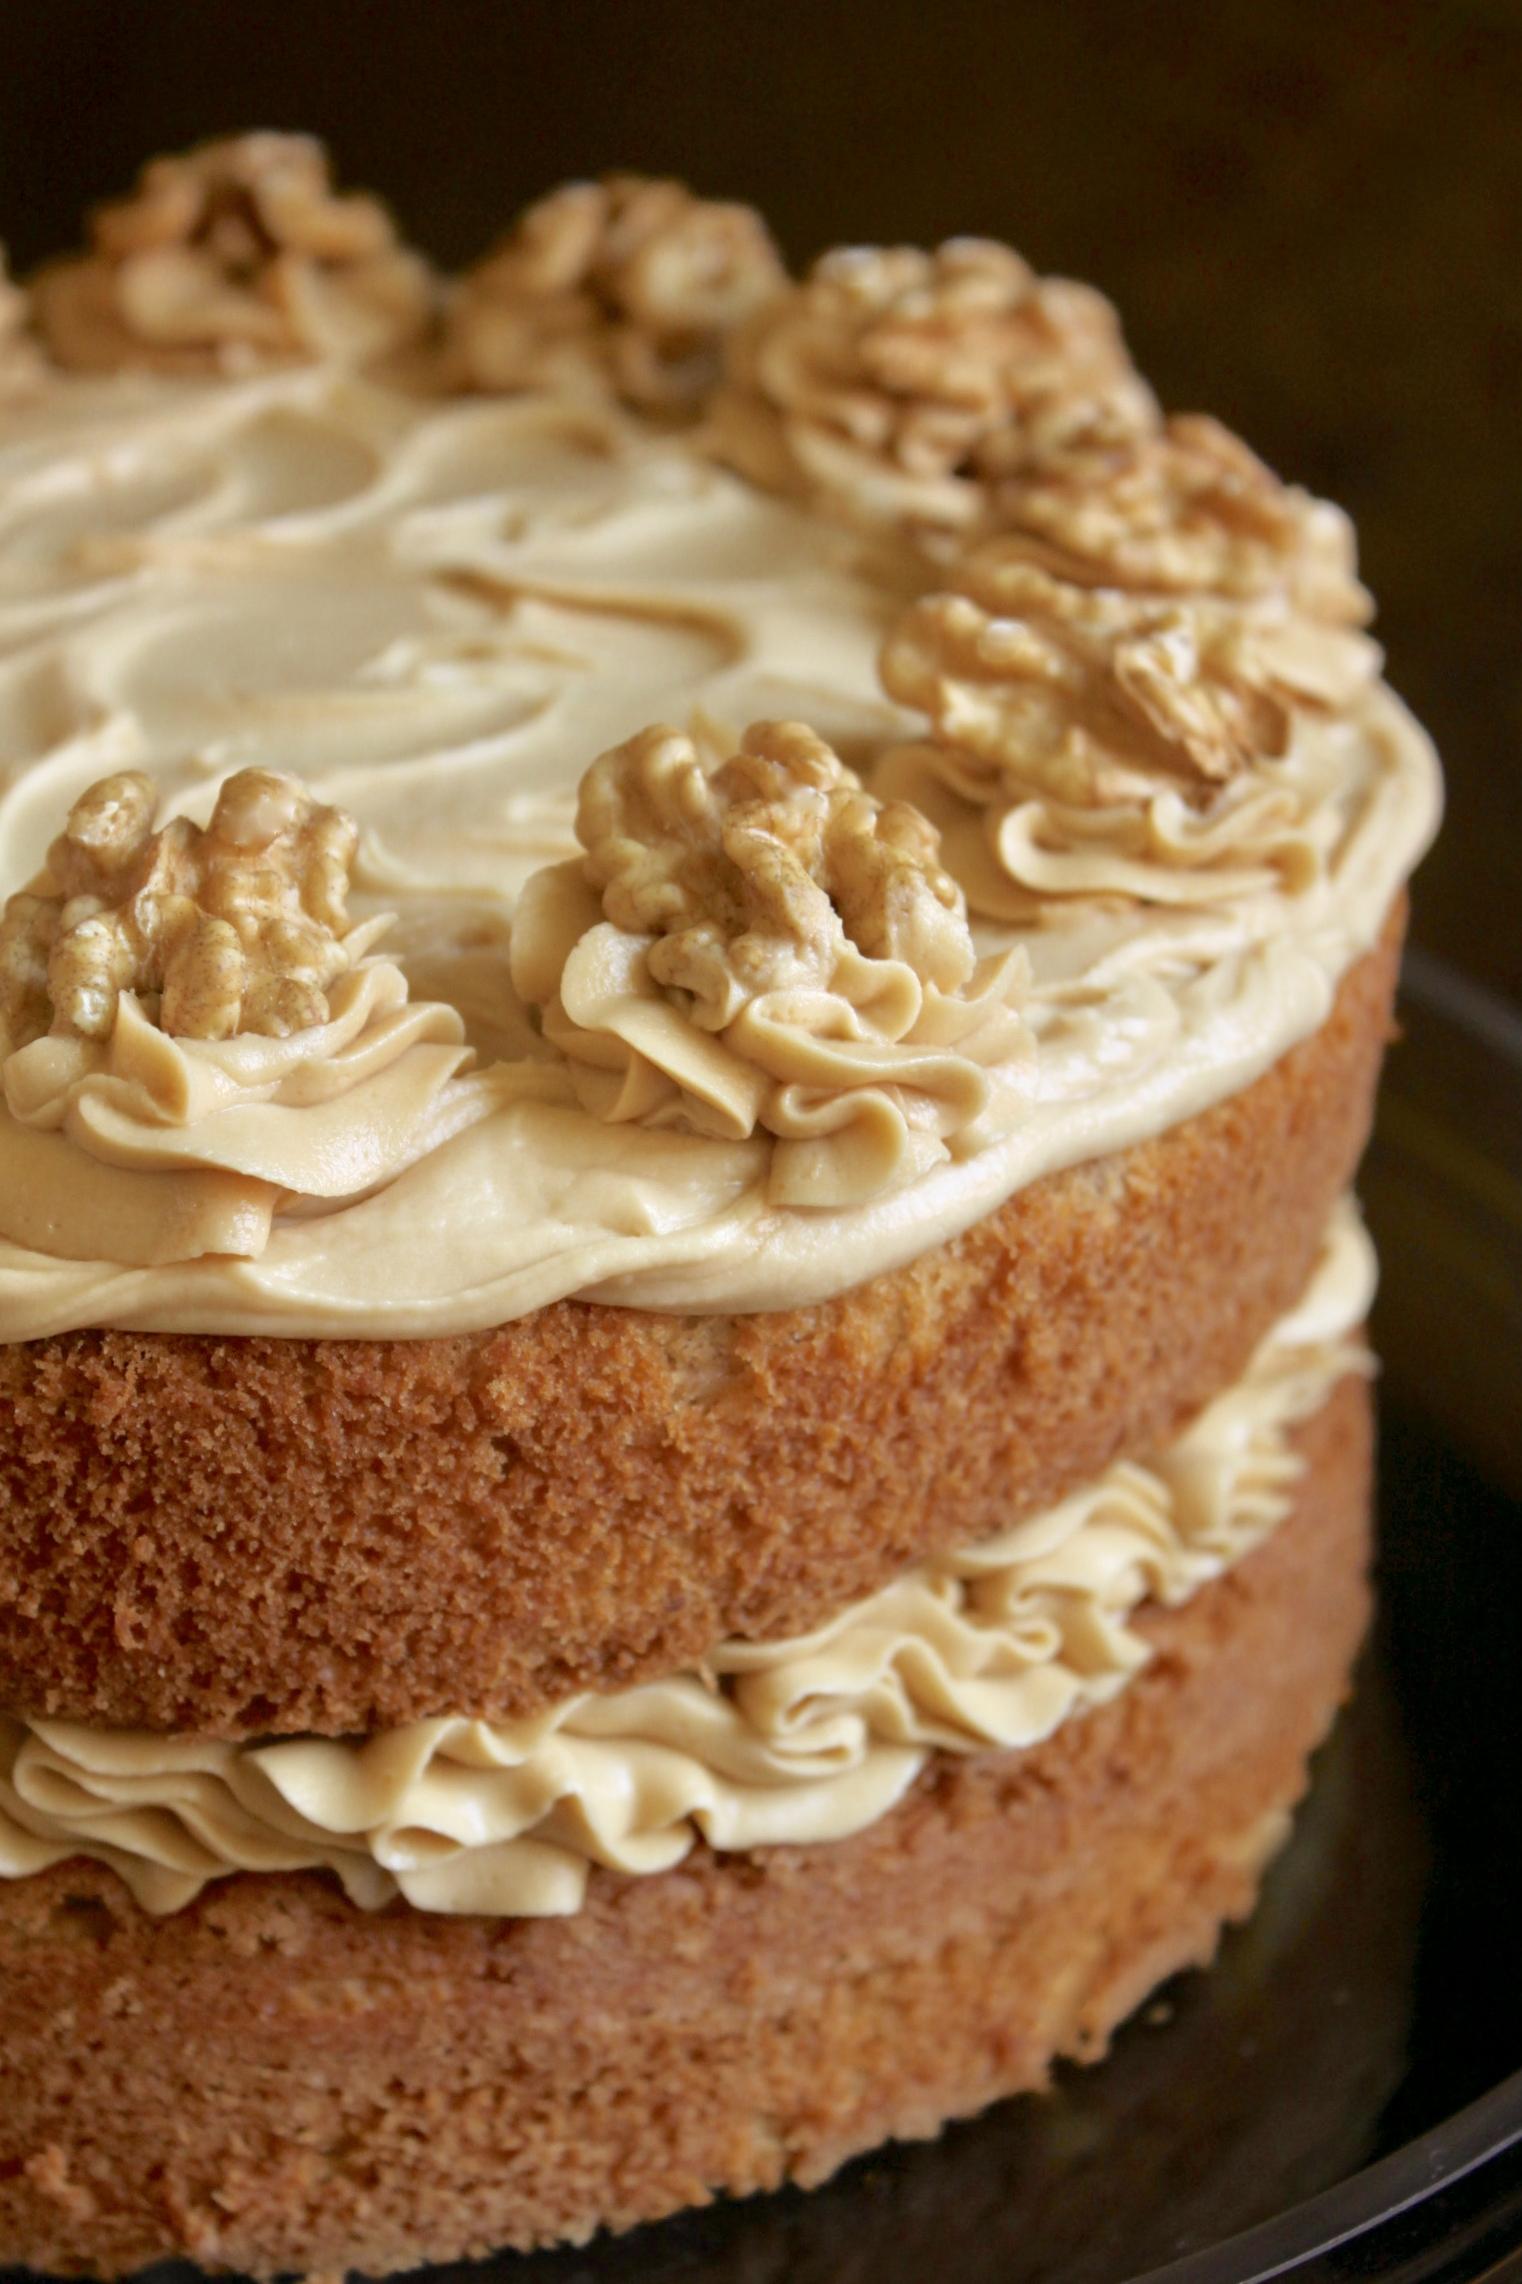  This cake will give you a serious case of the coffee cravings